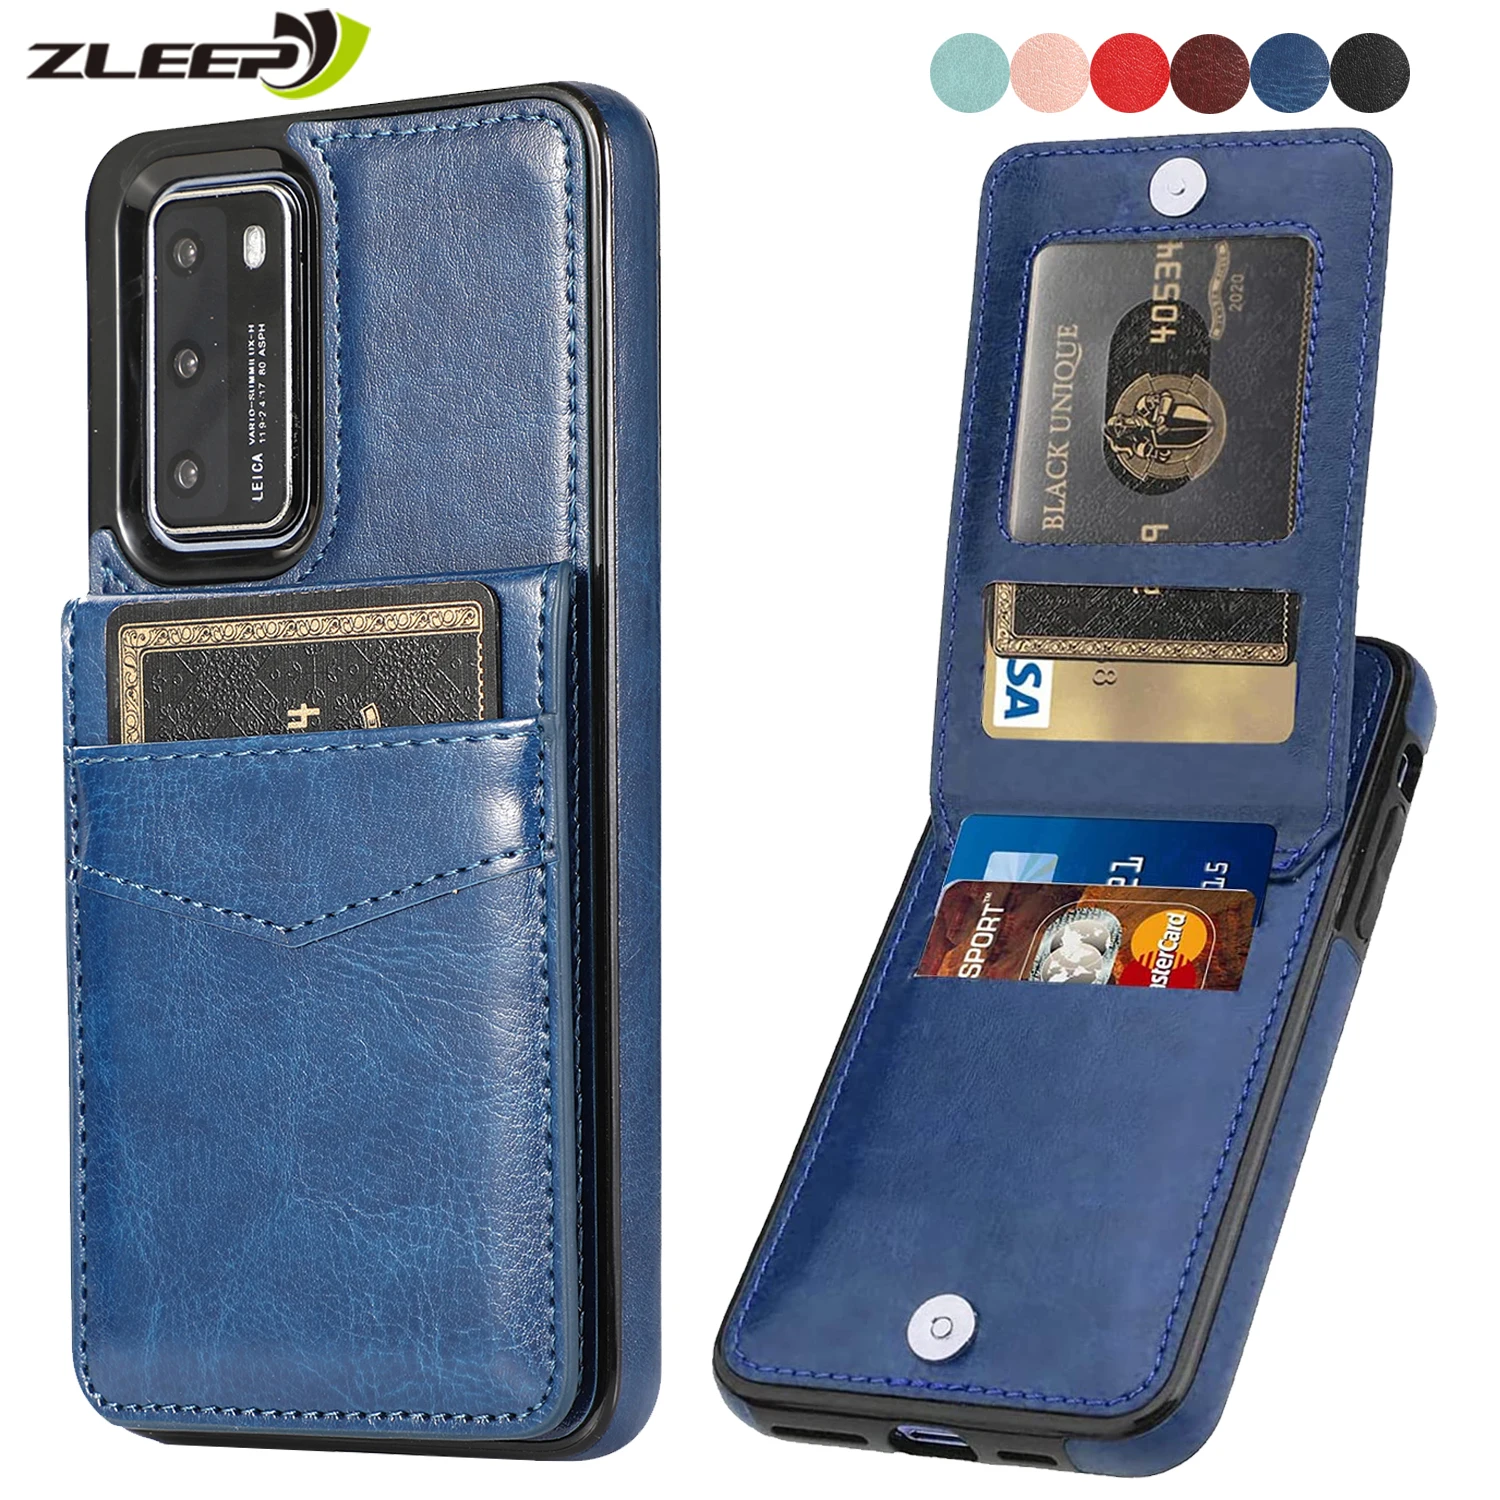 Luxury Flip Leather Case For Huawei P40 P30 Mate 40 30 20 Pro Plus Lite  Wallet Card Strong Magnetic Protection Phone Bags Cover